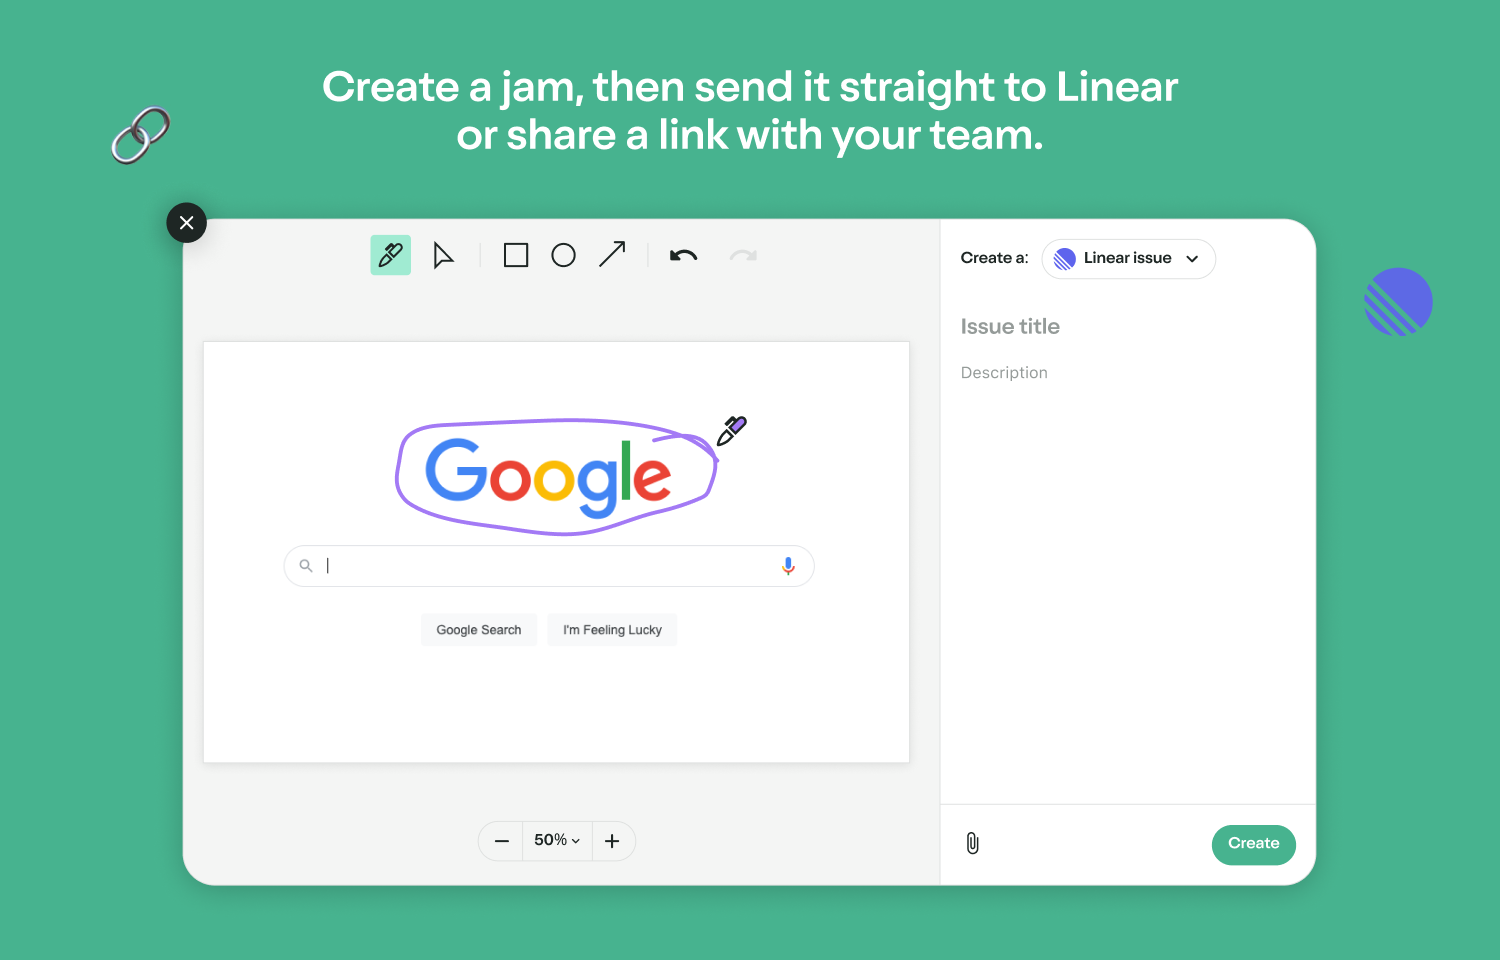 Create a jam, then send it straight to Linear or share a link with your team.